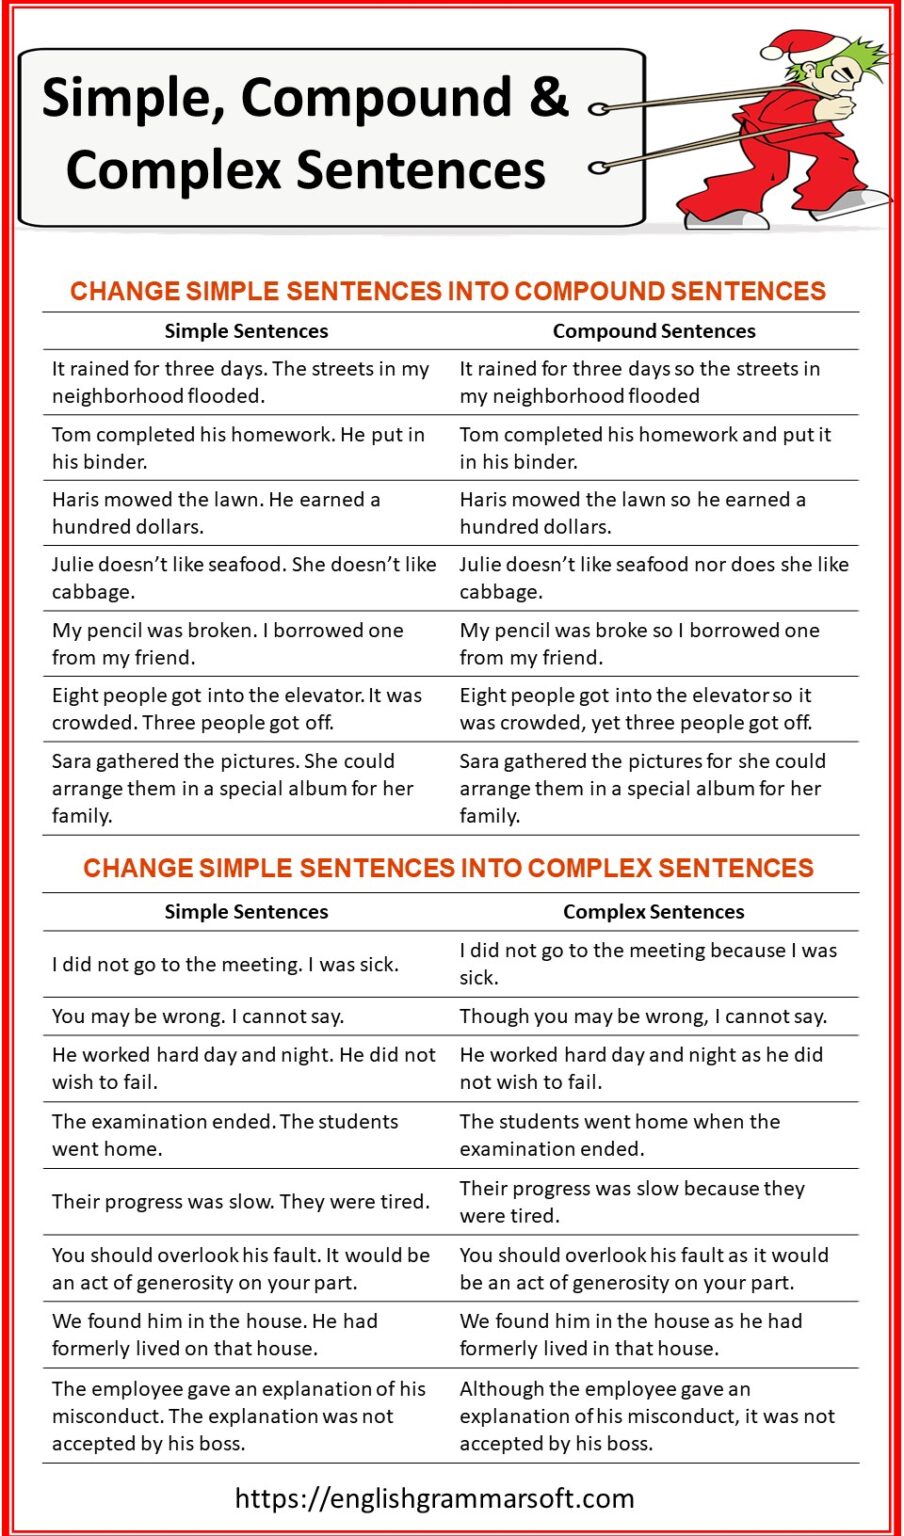 writing-complex-sentences-worksheet-means-for-each-pair-of